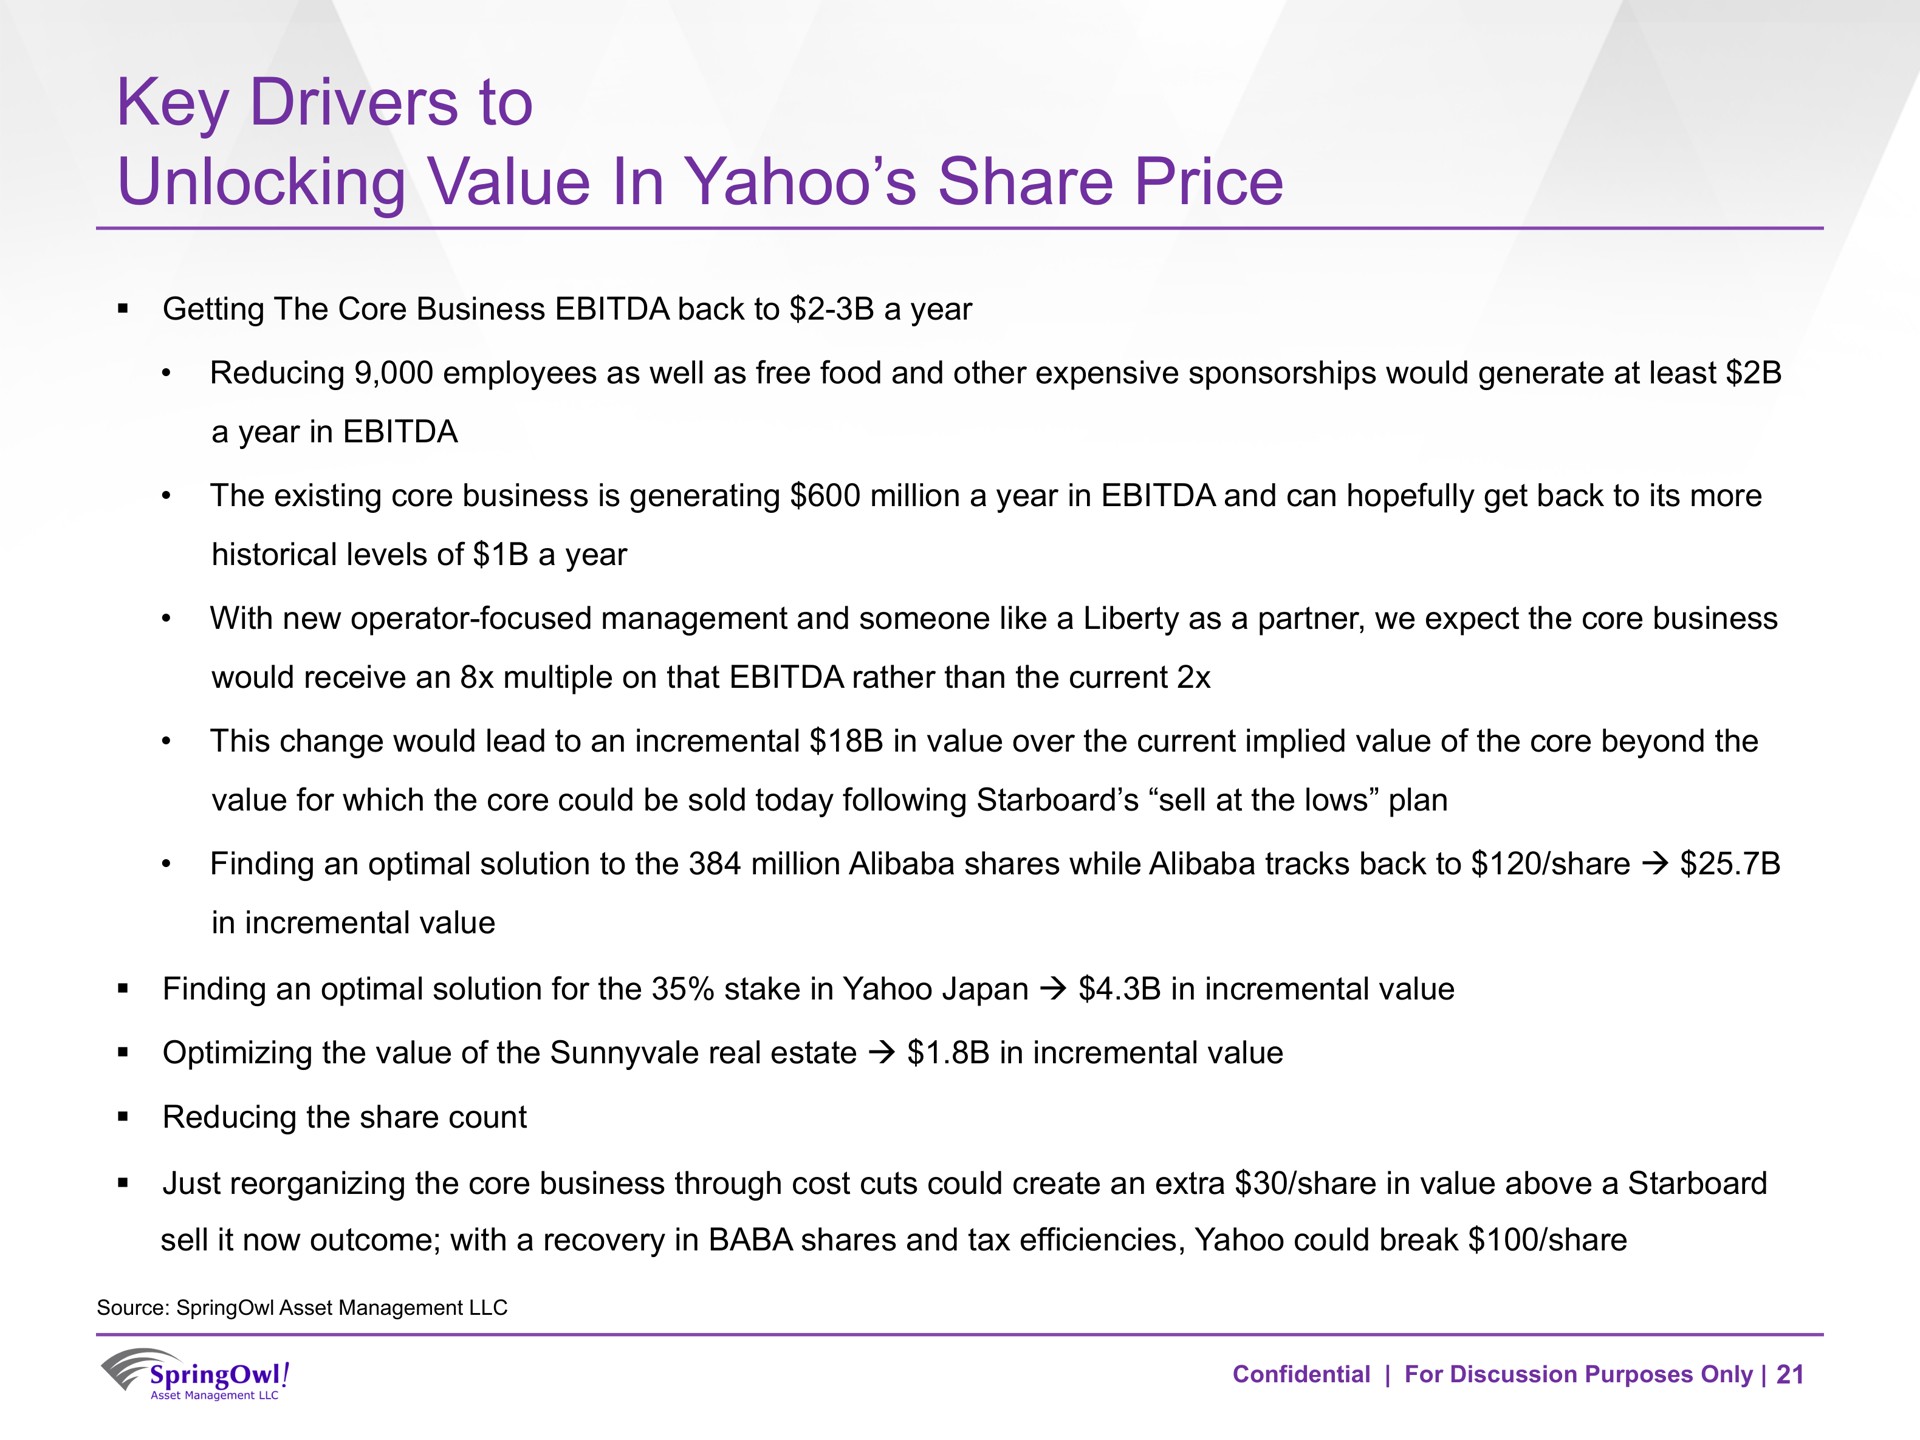 key drivers to unlocking value in yahoo share price | SpringOwl